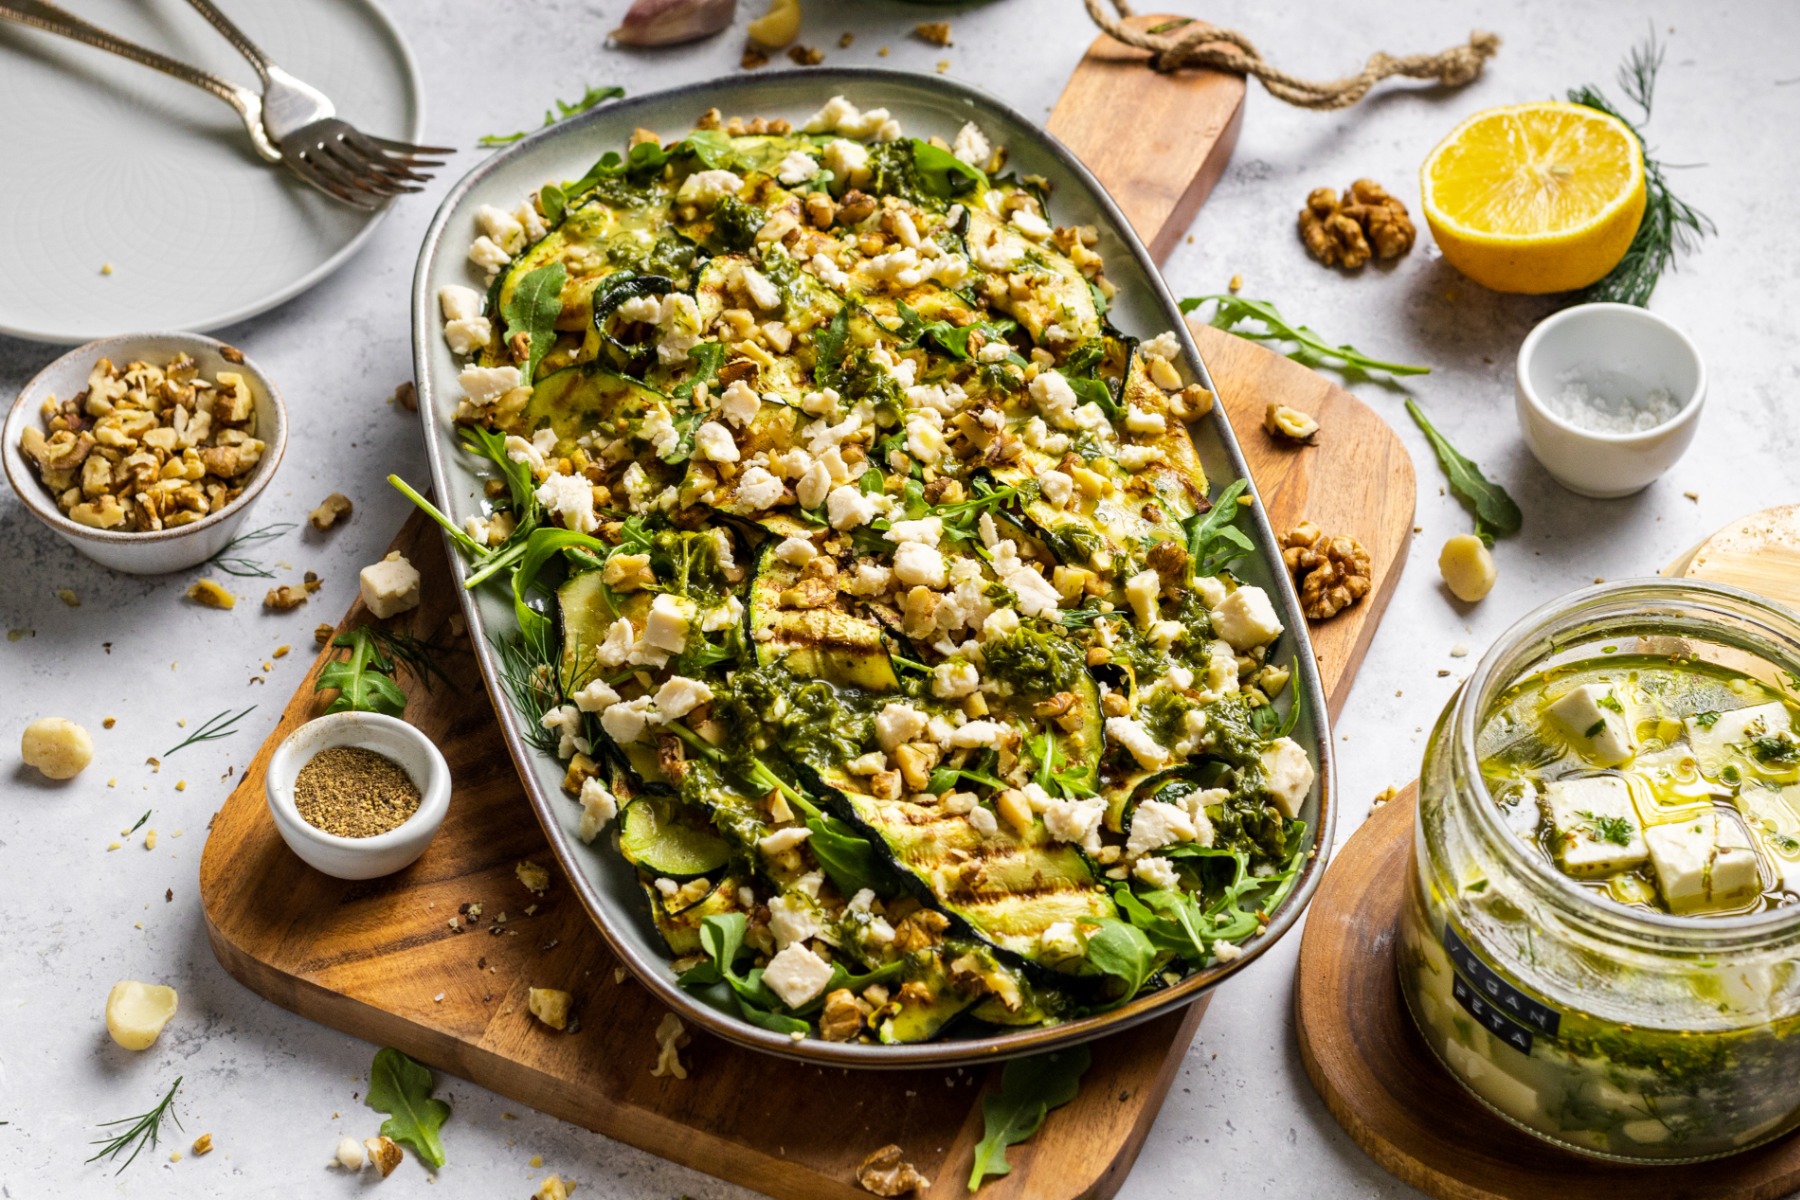 Grilled Courgette & Walnut Salad with Macadamia Feta